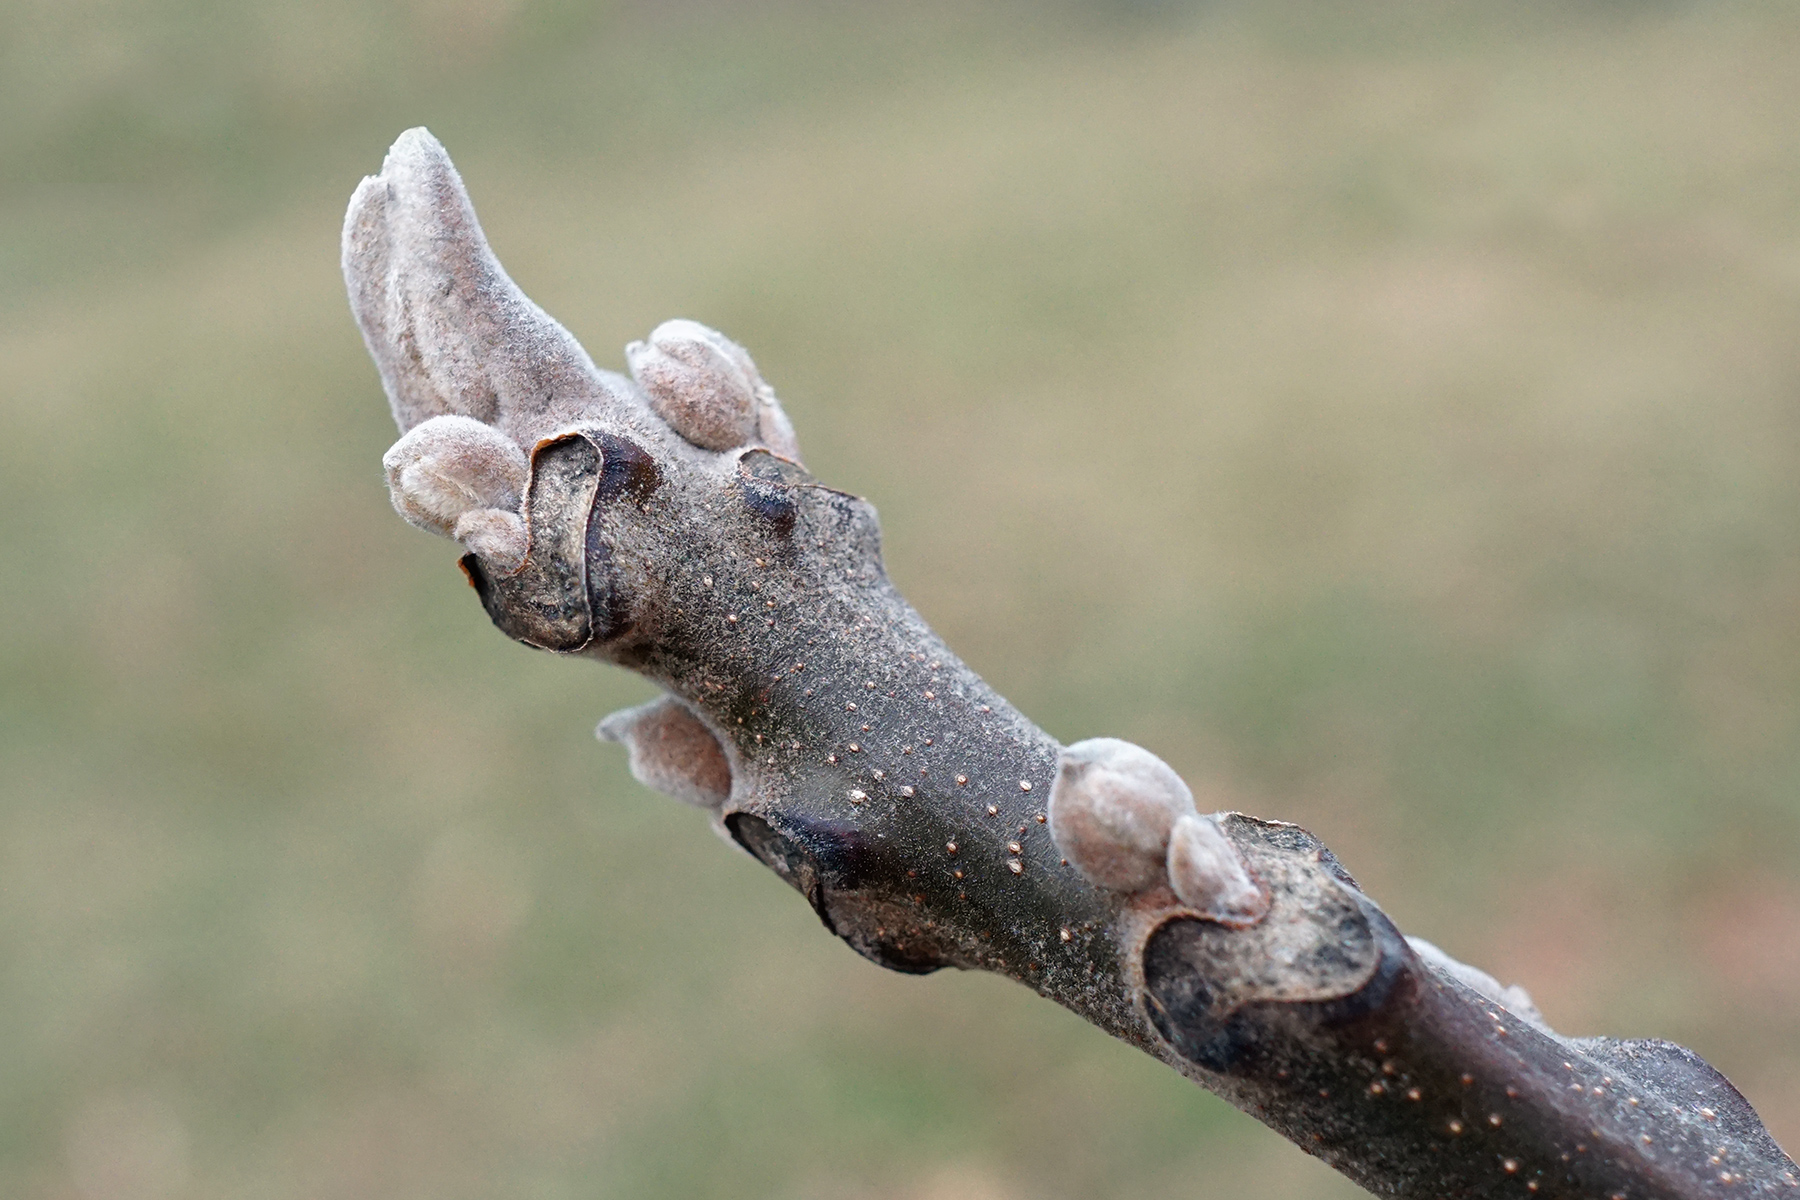 The bud scars on the winter twig of the Black Walnut resemble the face of a monkey.